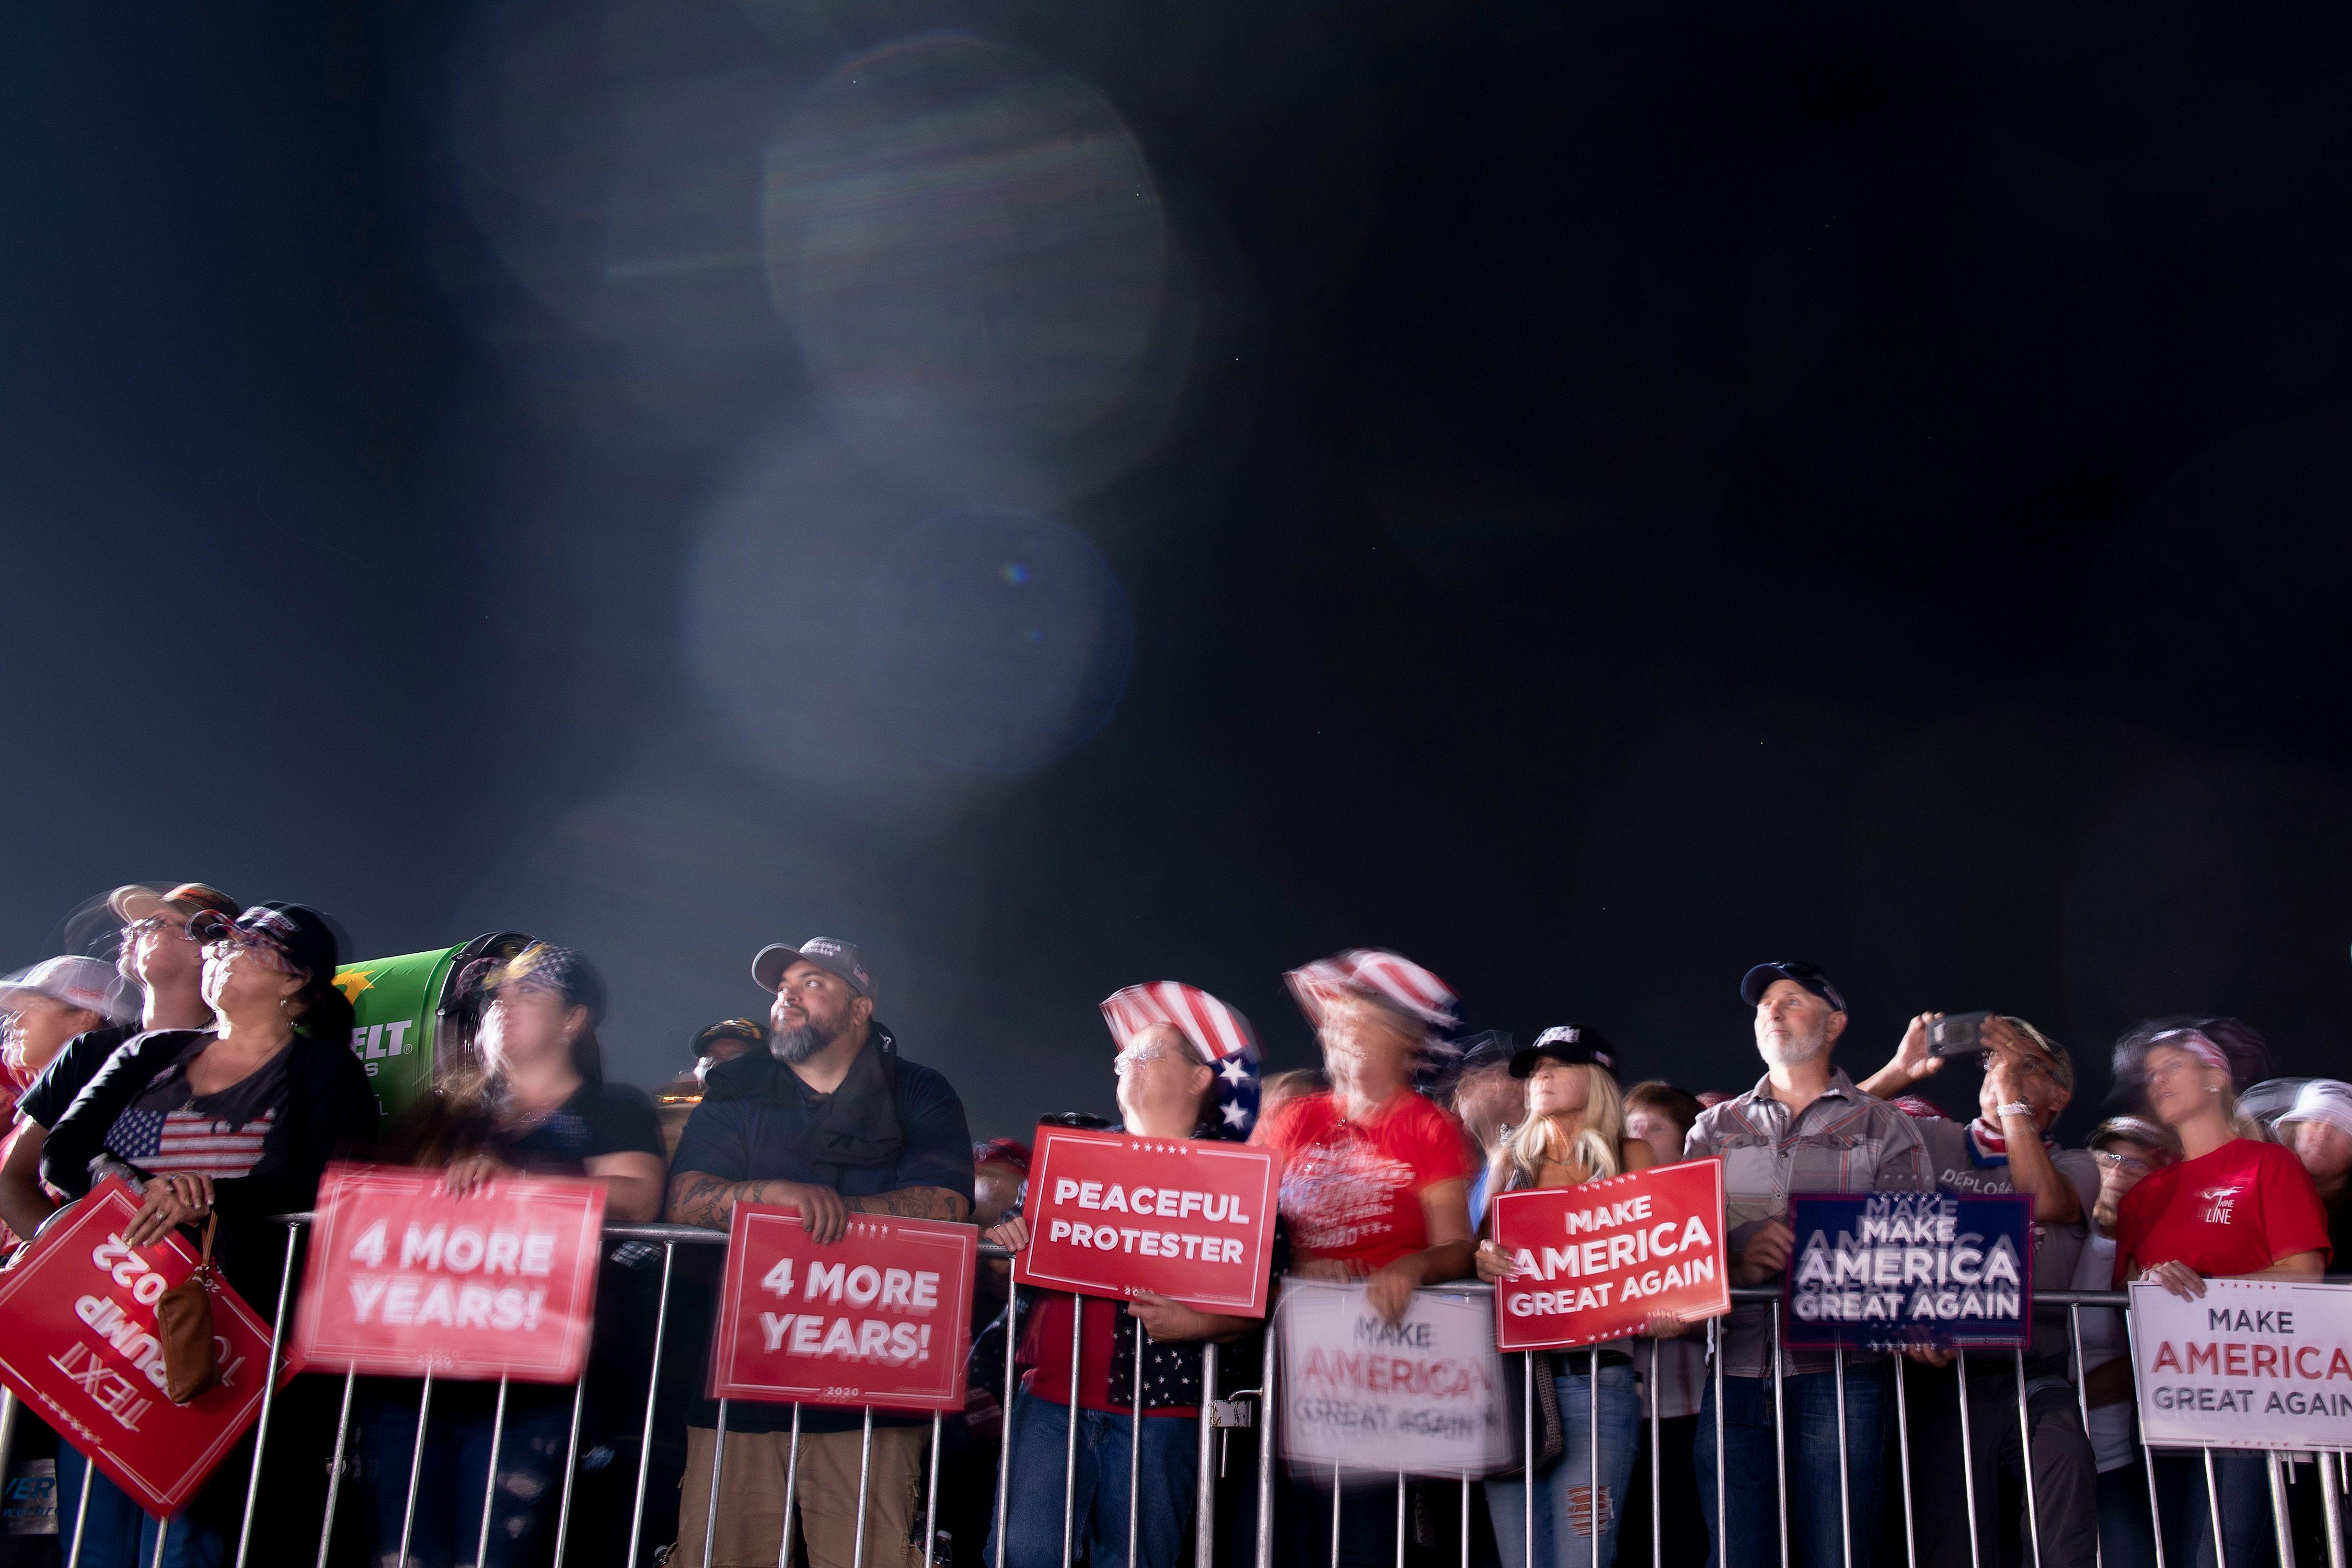 A crowd of Trump supporters behind a barrier at night. They are holding signs that say "Four More Years" and "Make America Great Again."